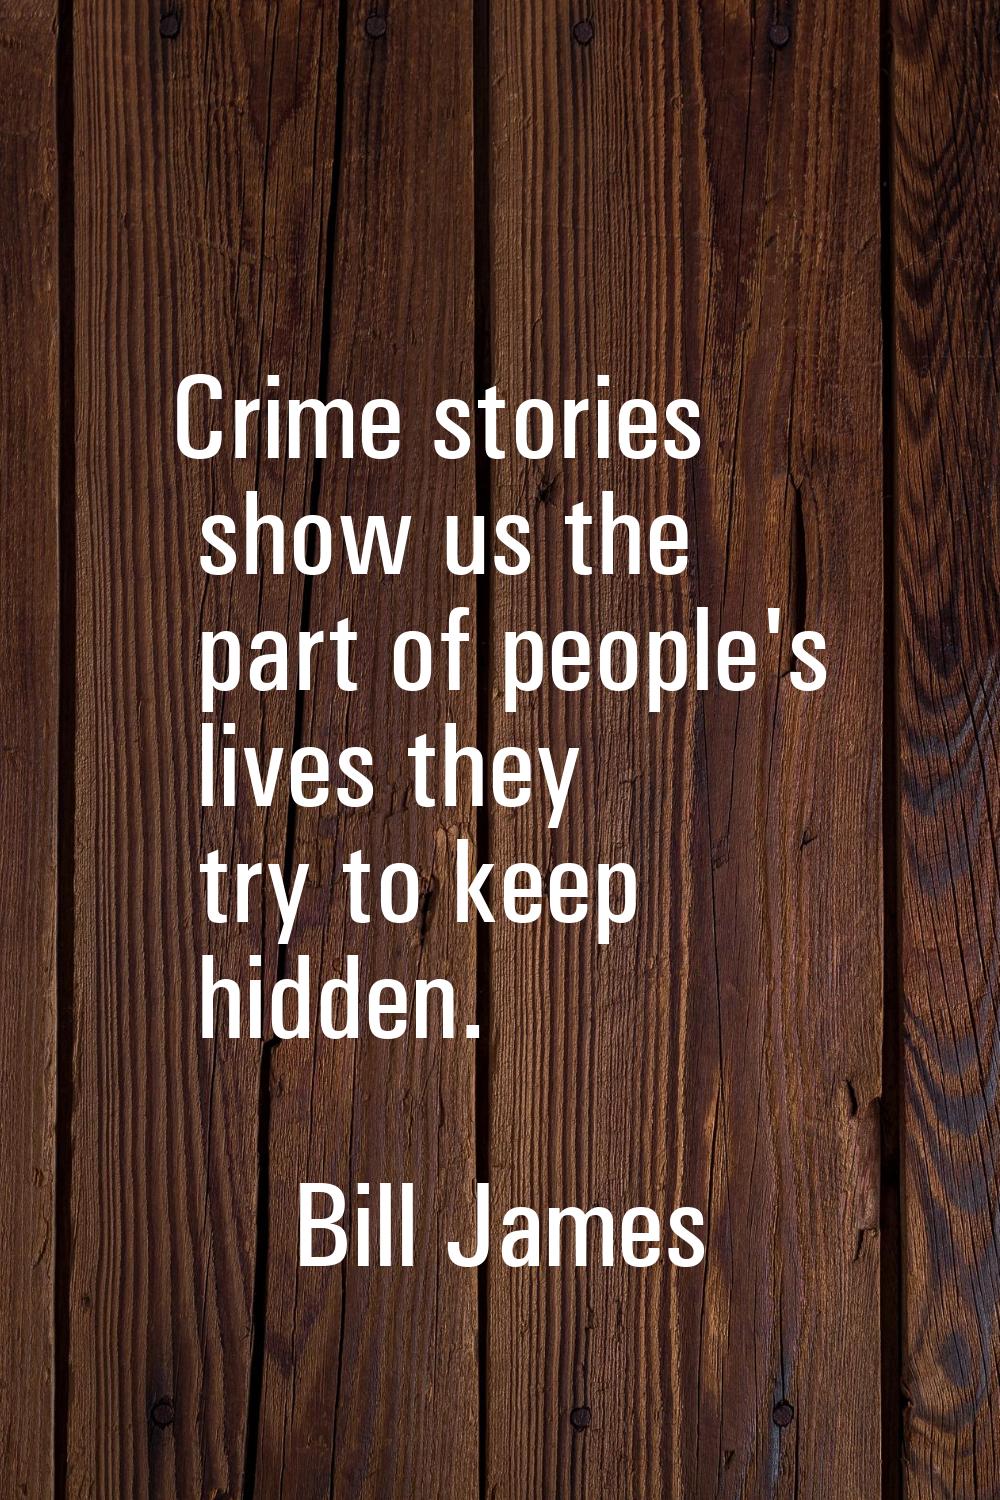 Crime stories show us the part of people's lives they try to keep hidden.